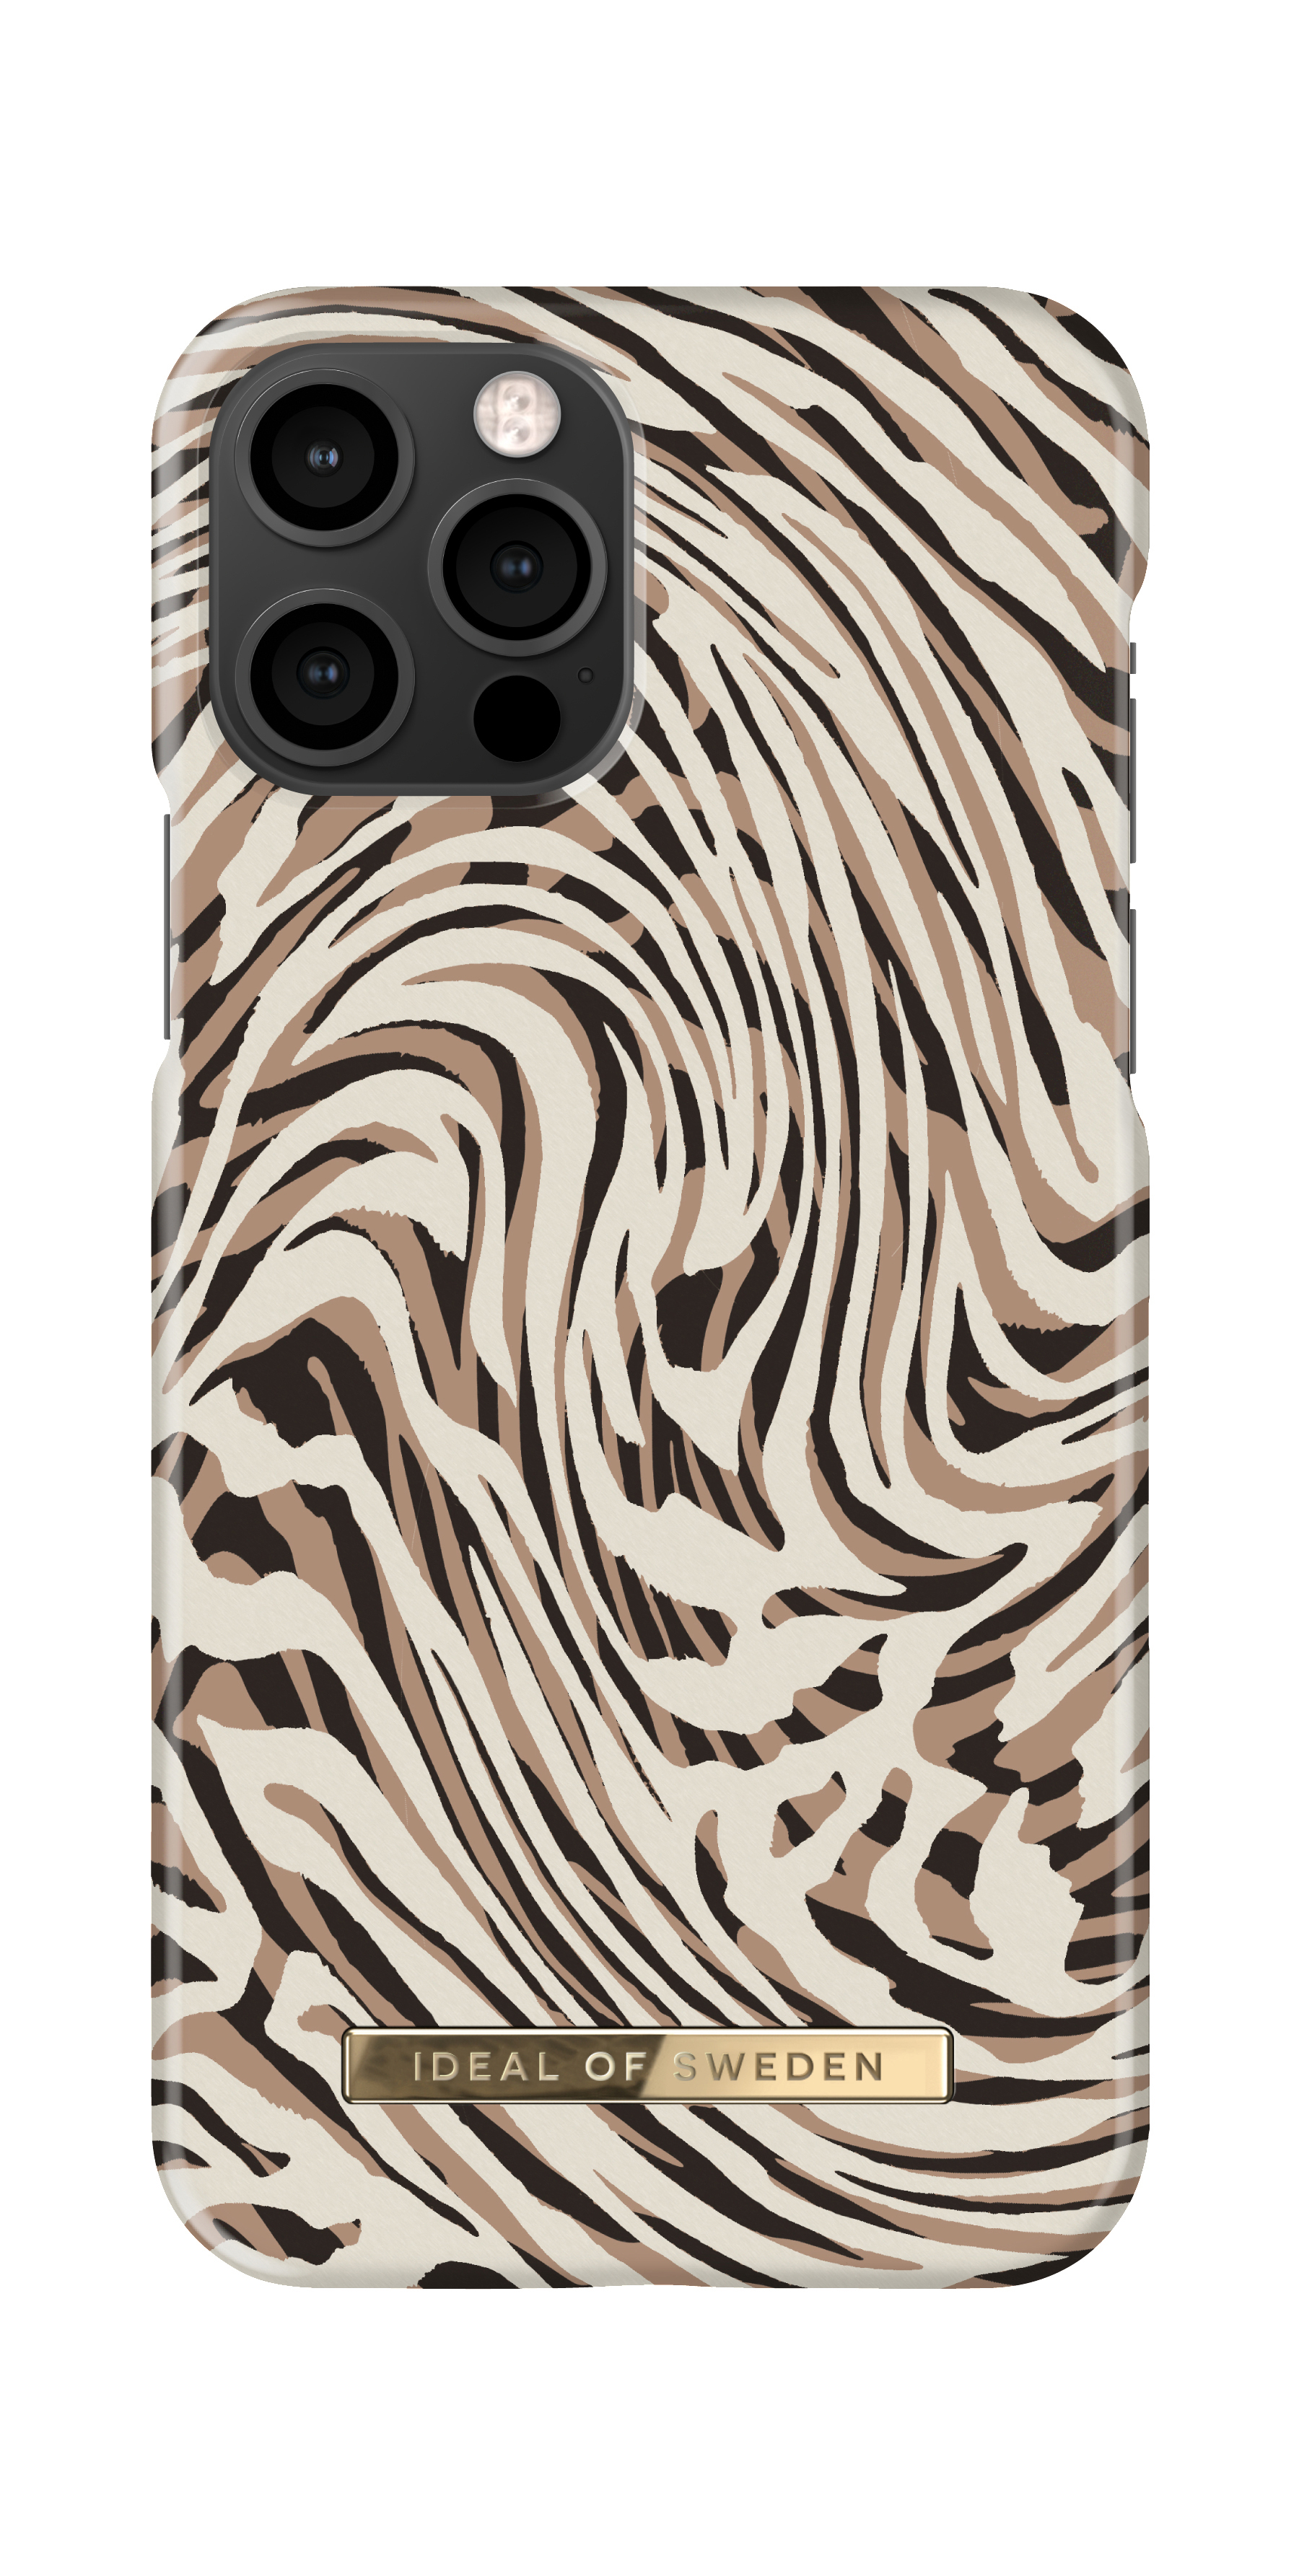 IDEAL OF Backcover, Hypnotic 12/12Pro, iPhone SWEDEN Zebra Apple, IDFCSS22-I2061-392